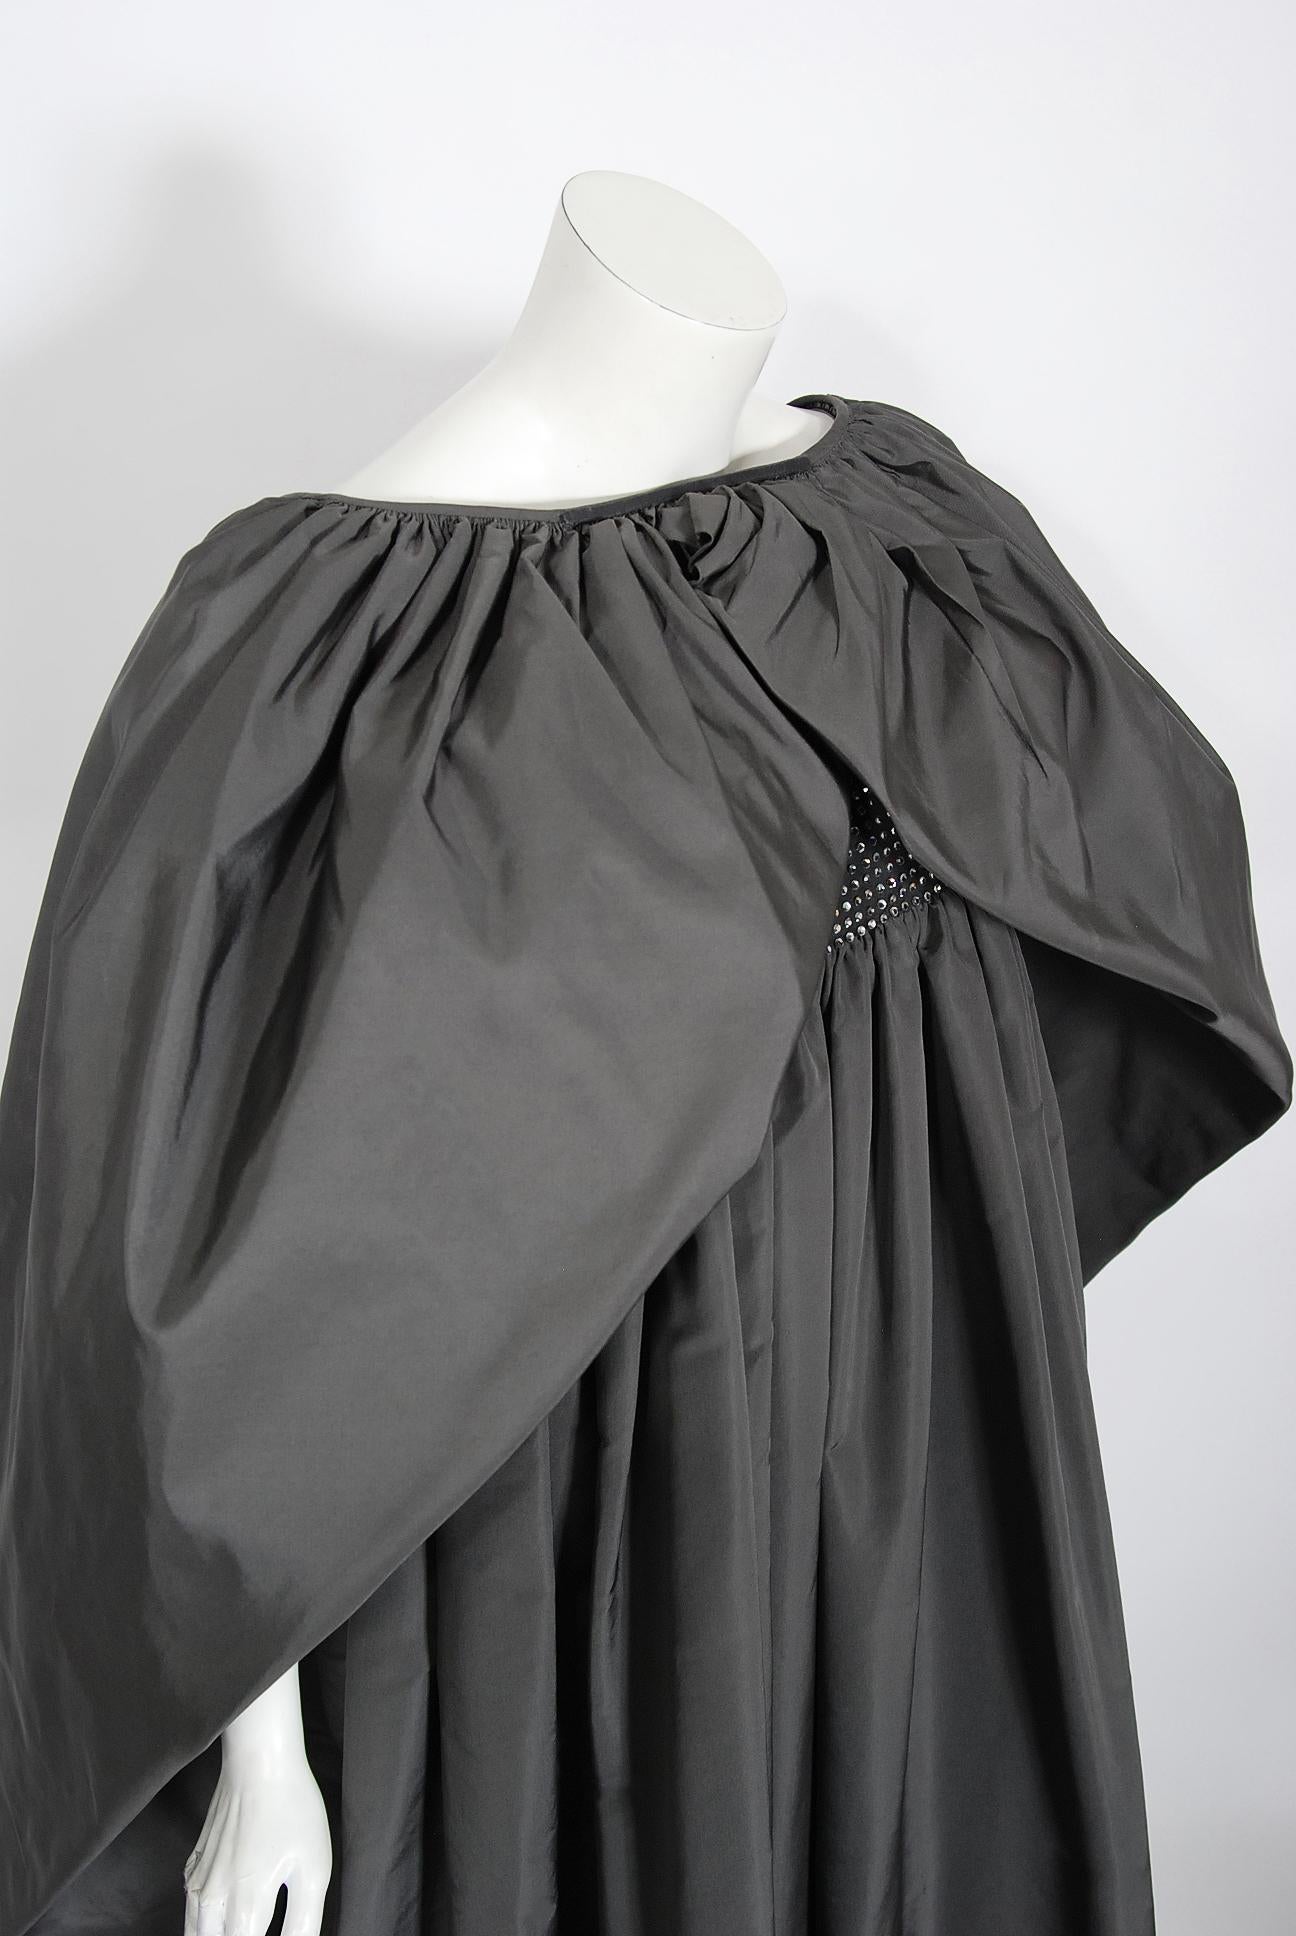 solicitors gown